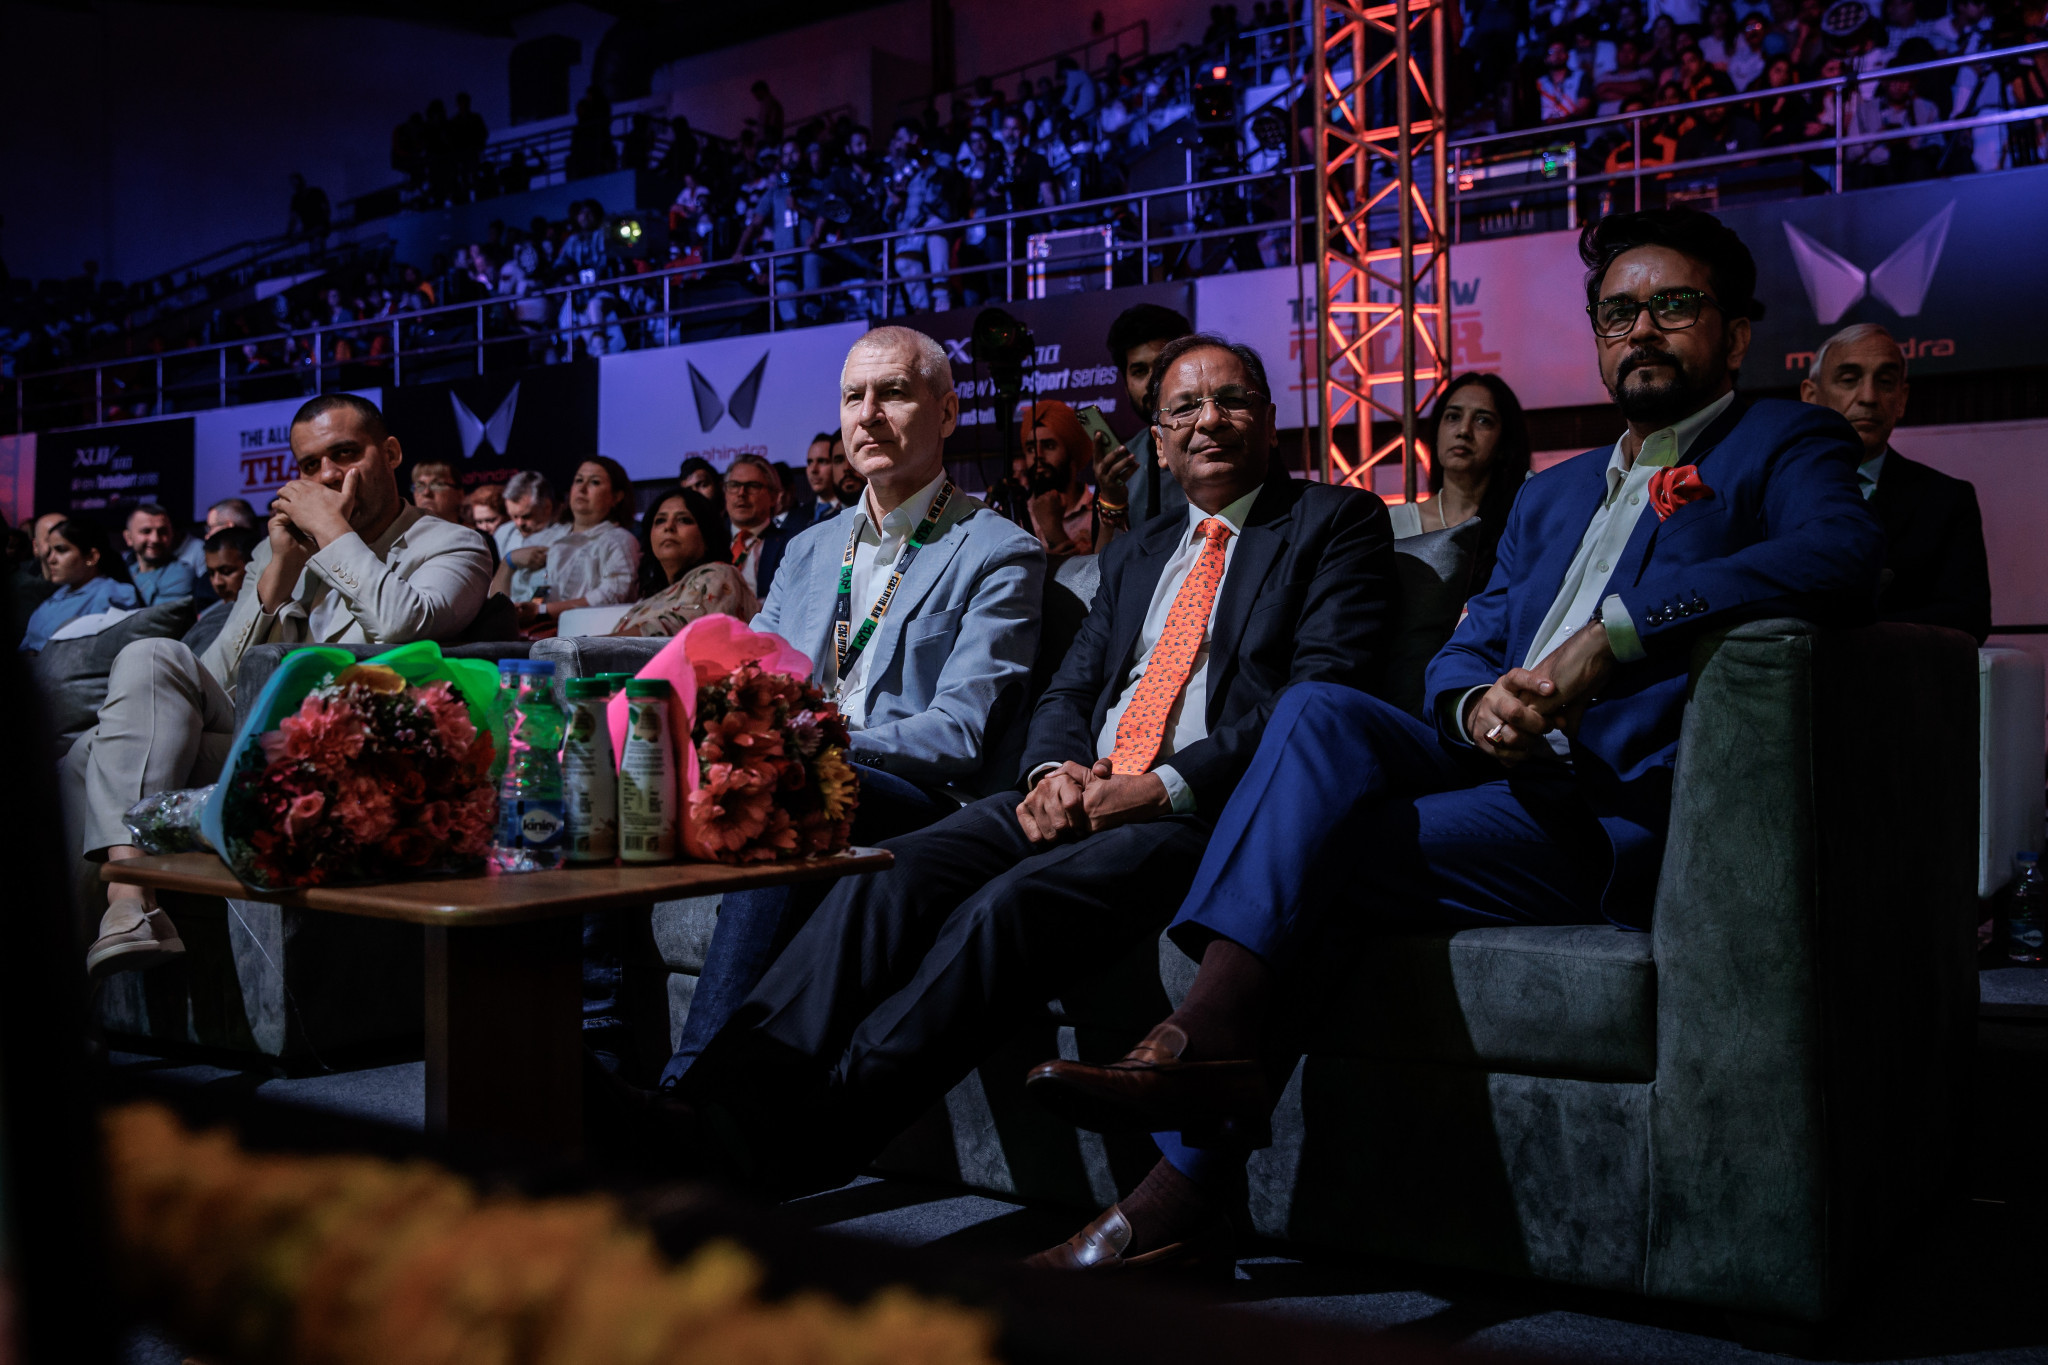 Russian Sports Minister Oleg Matytsin, second from left, said next to IBA President Umar Kremlev, left, as well as Boxing Federation of India leader Ajay Singh, second from right, and Indian Sports Minister Anurag Thakur ©IBA